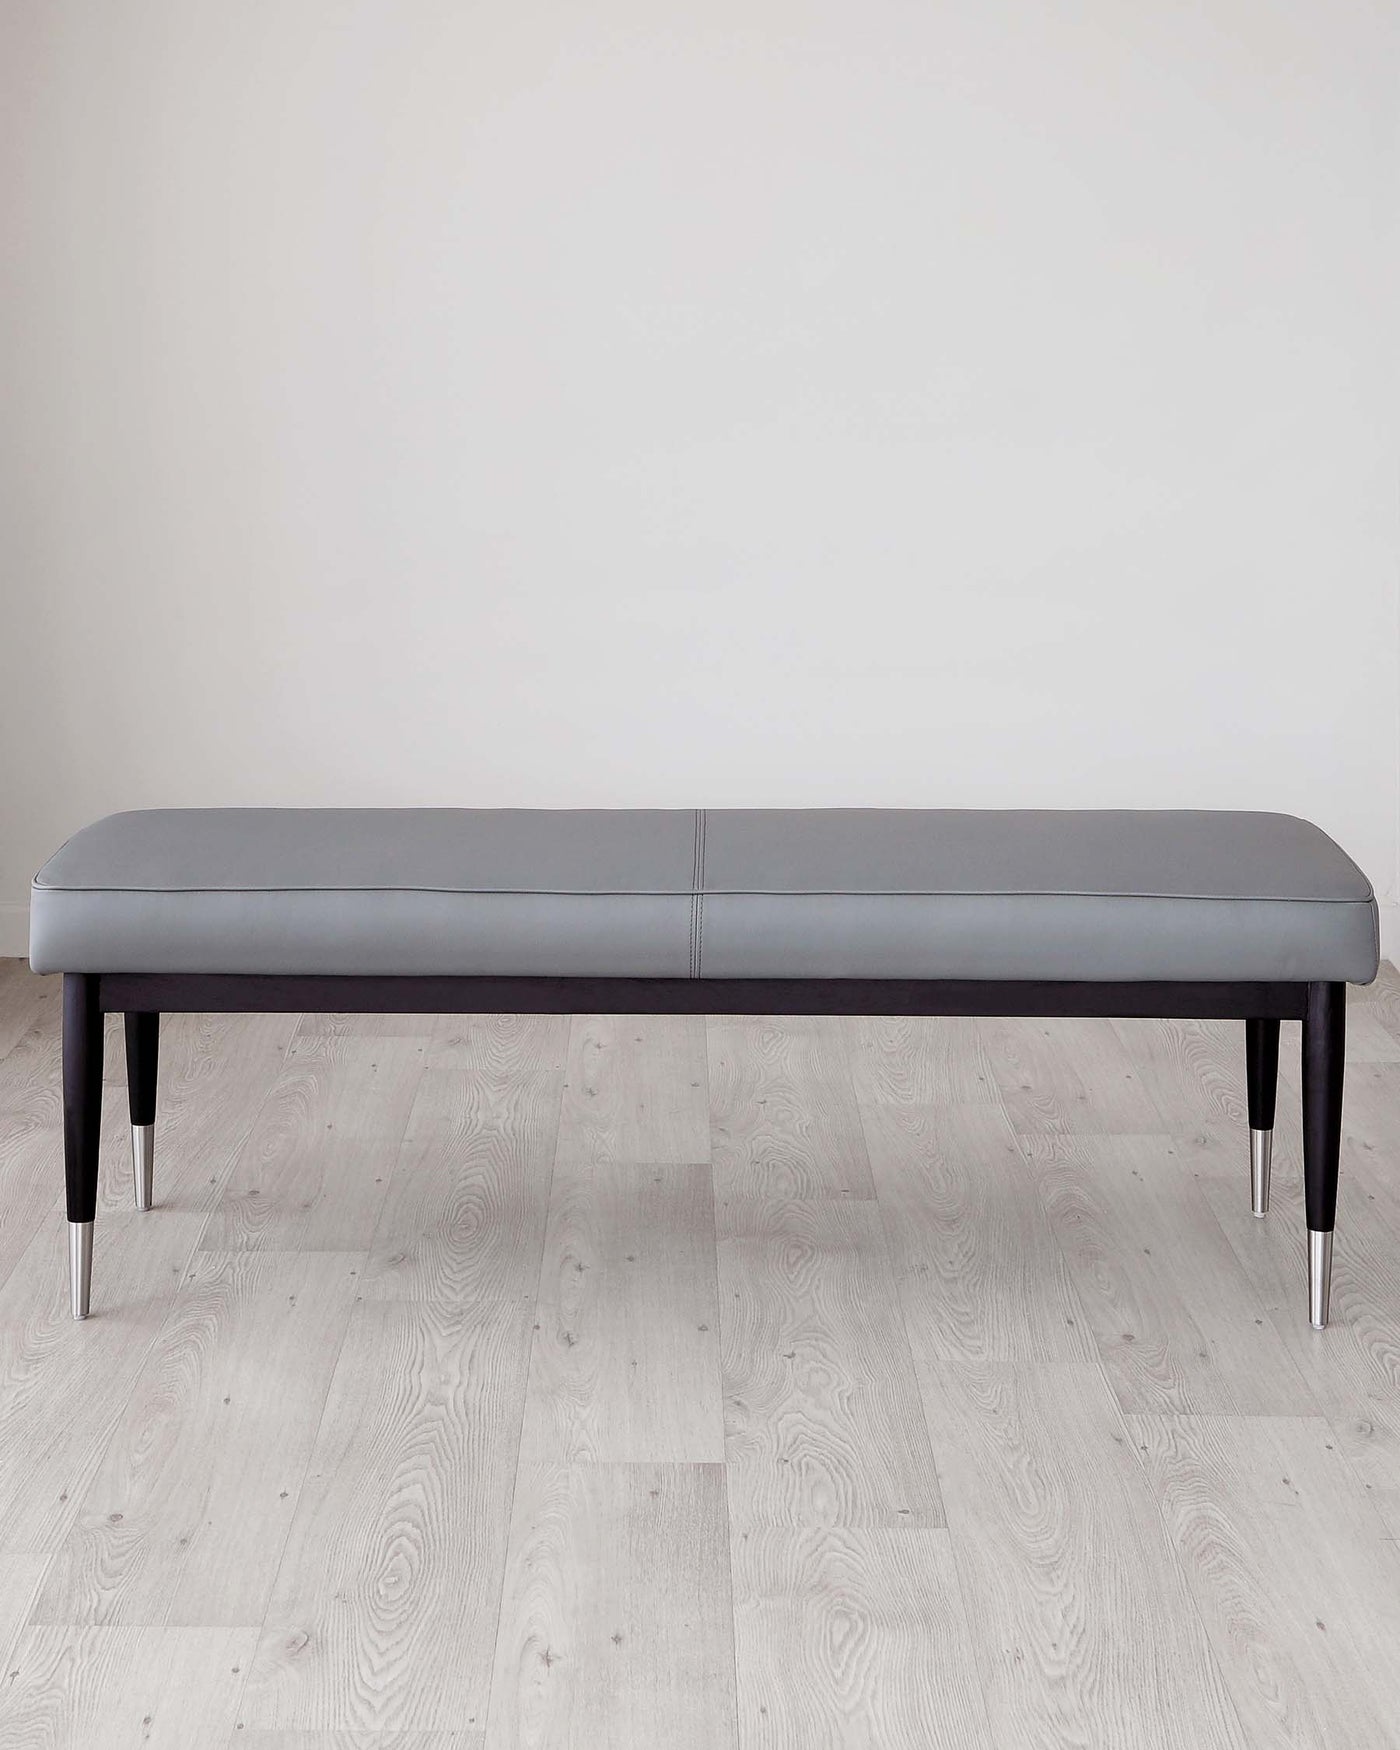 Modern minimalist grey upholstered bench with black wooden legs and metallic accents, displayed on a light wooden floor against a plain white wall.